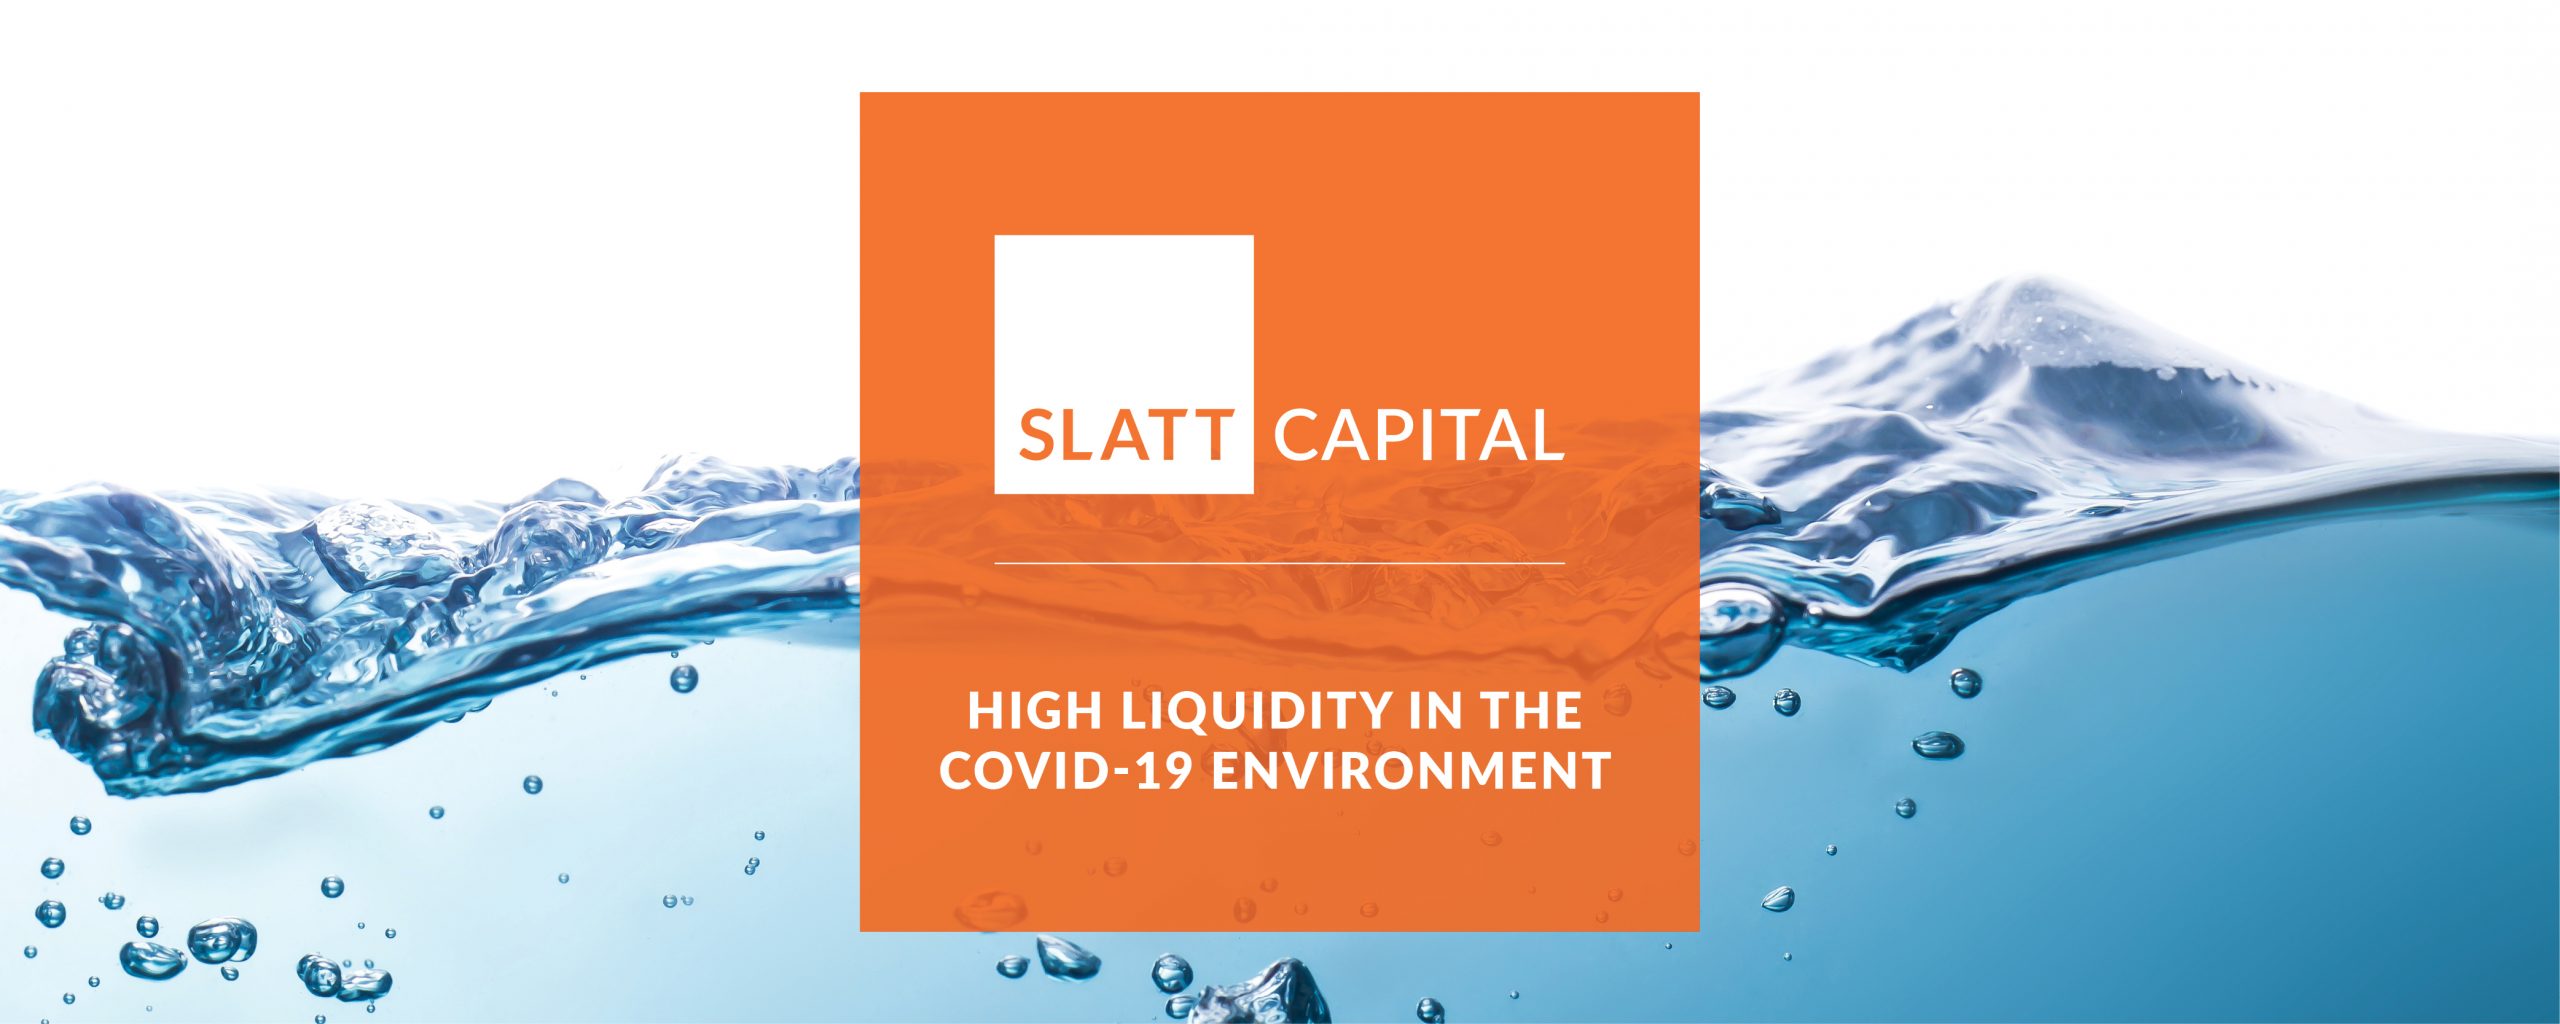 High_Liquidity - COVID-19 - Commercial_Investing